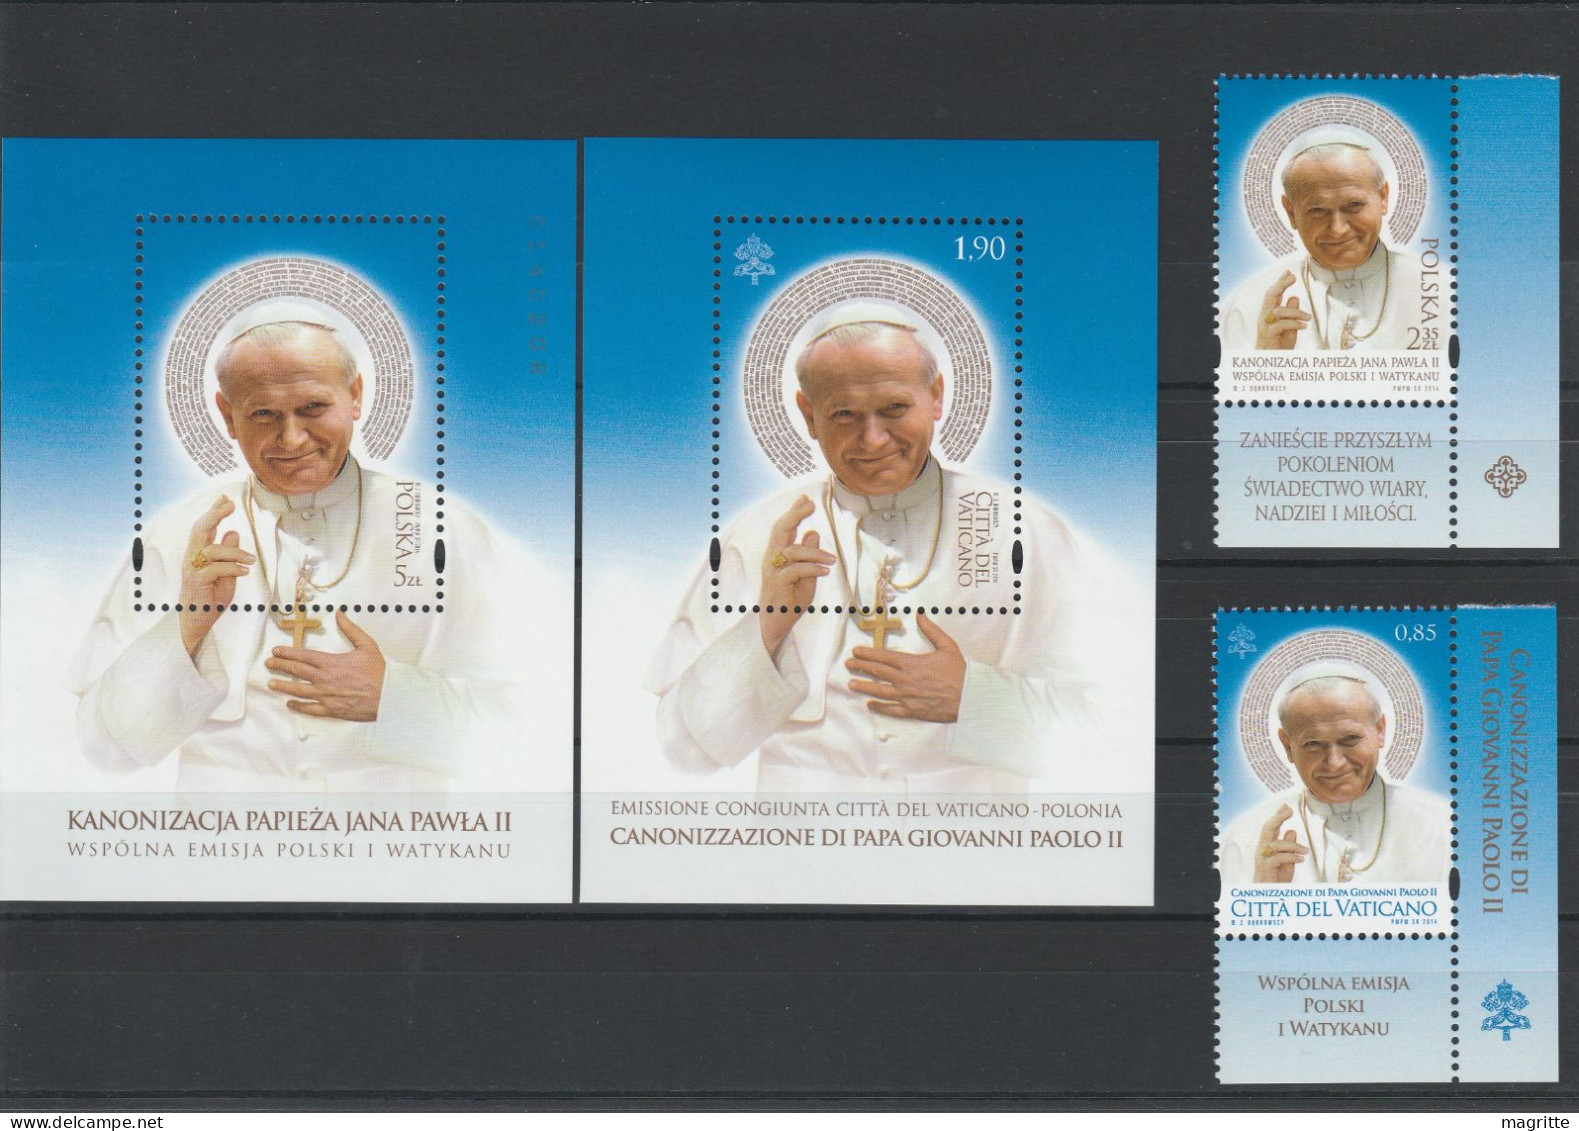 Pologne Vatican 2014 Emission Commune Canonisation Pape Jean Paul II Pope Poland Joint Issue John Paul II - Joint Issues